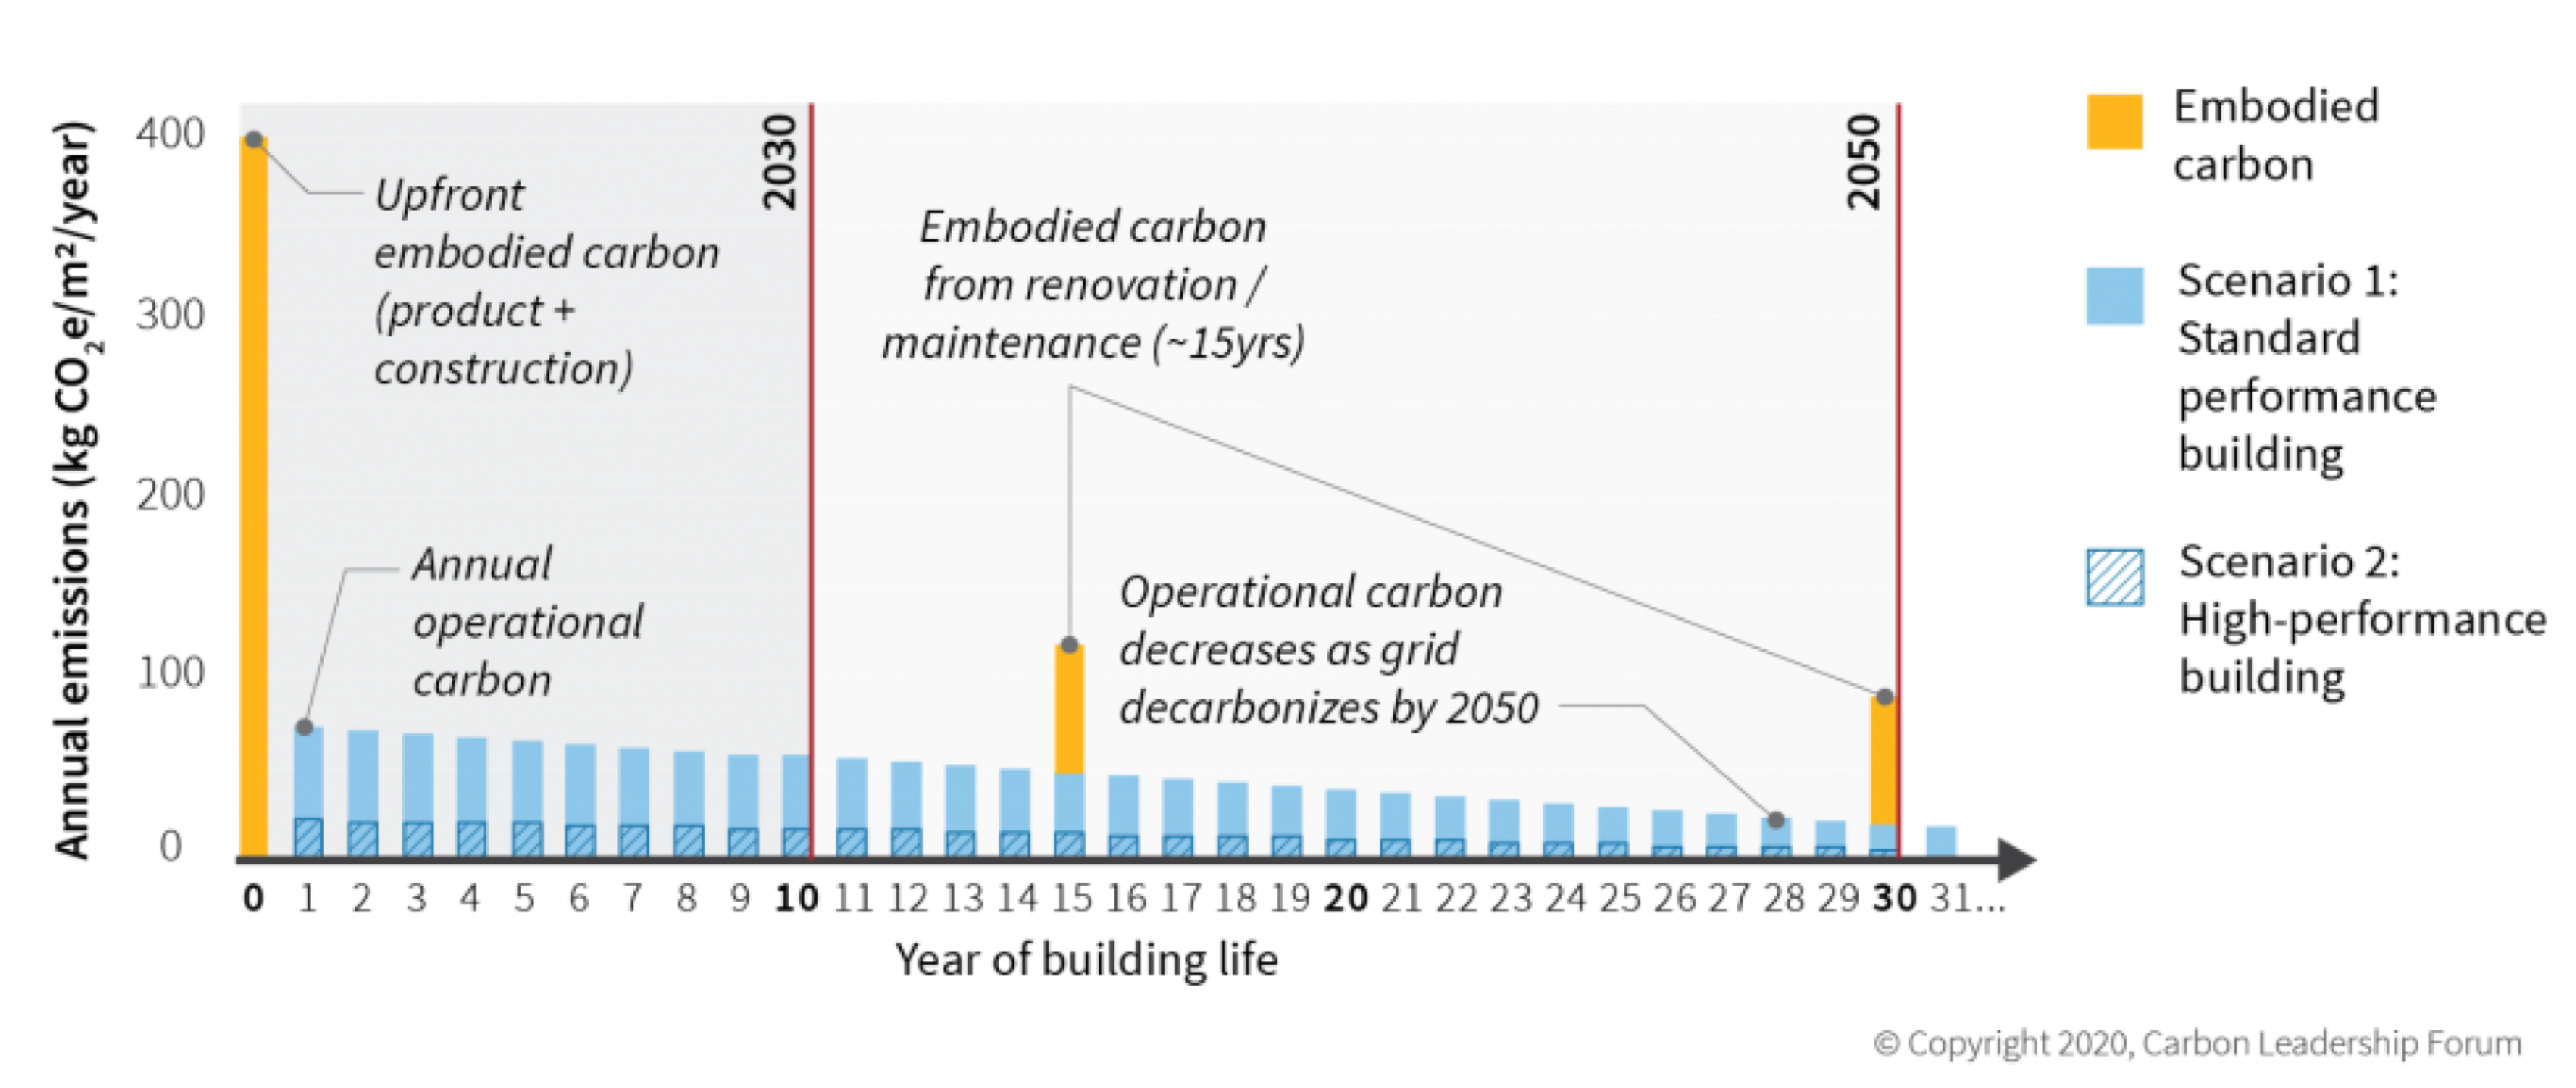 Embodied Carbon becomes increasingly important as the energy grid decarbonises gradually over the years.